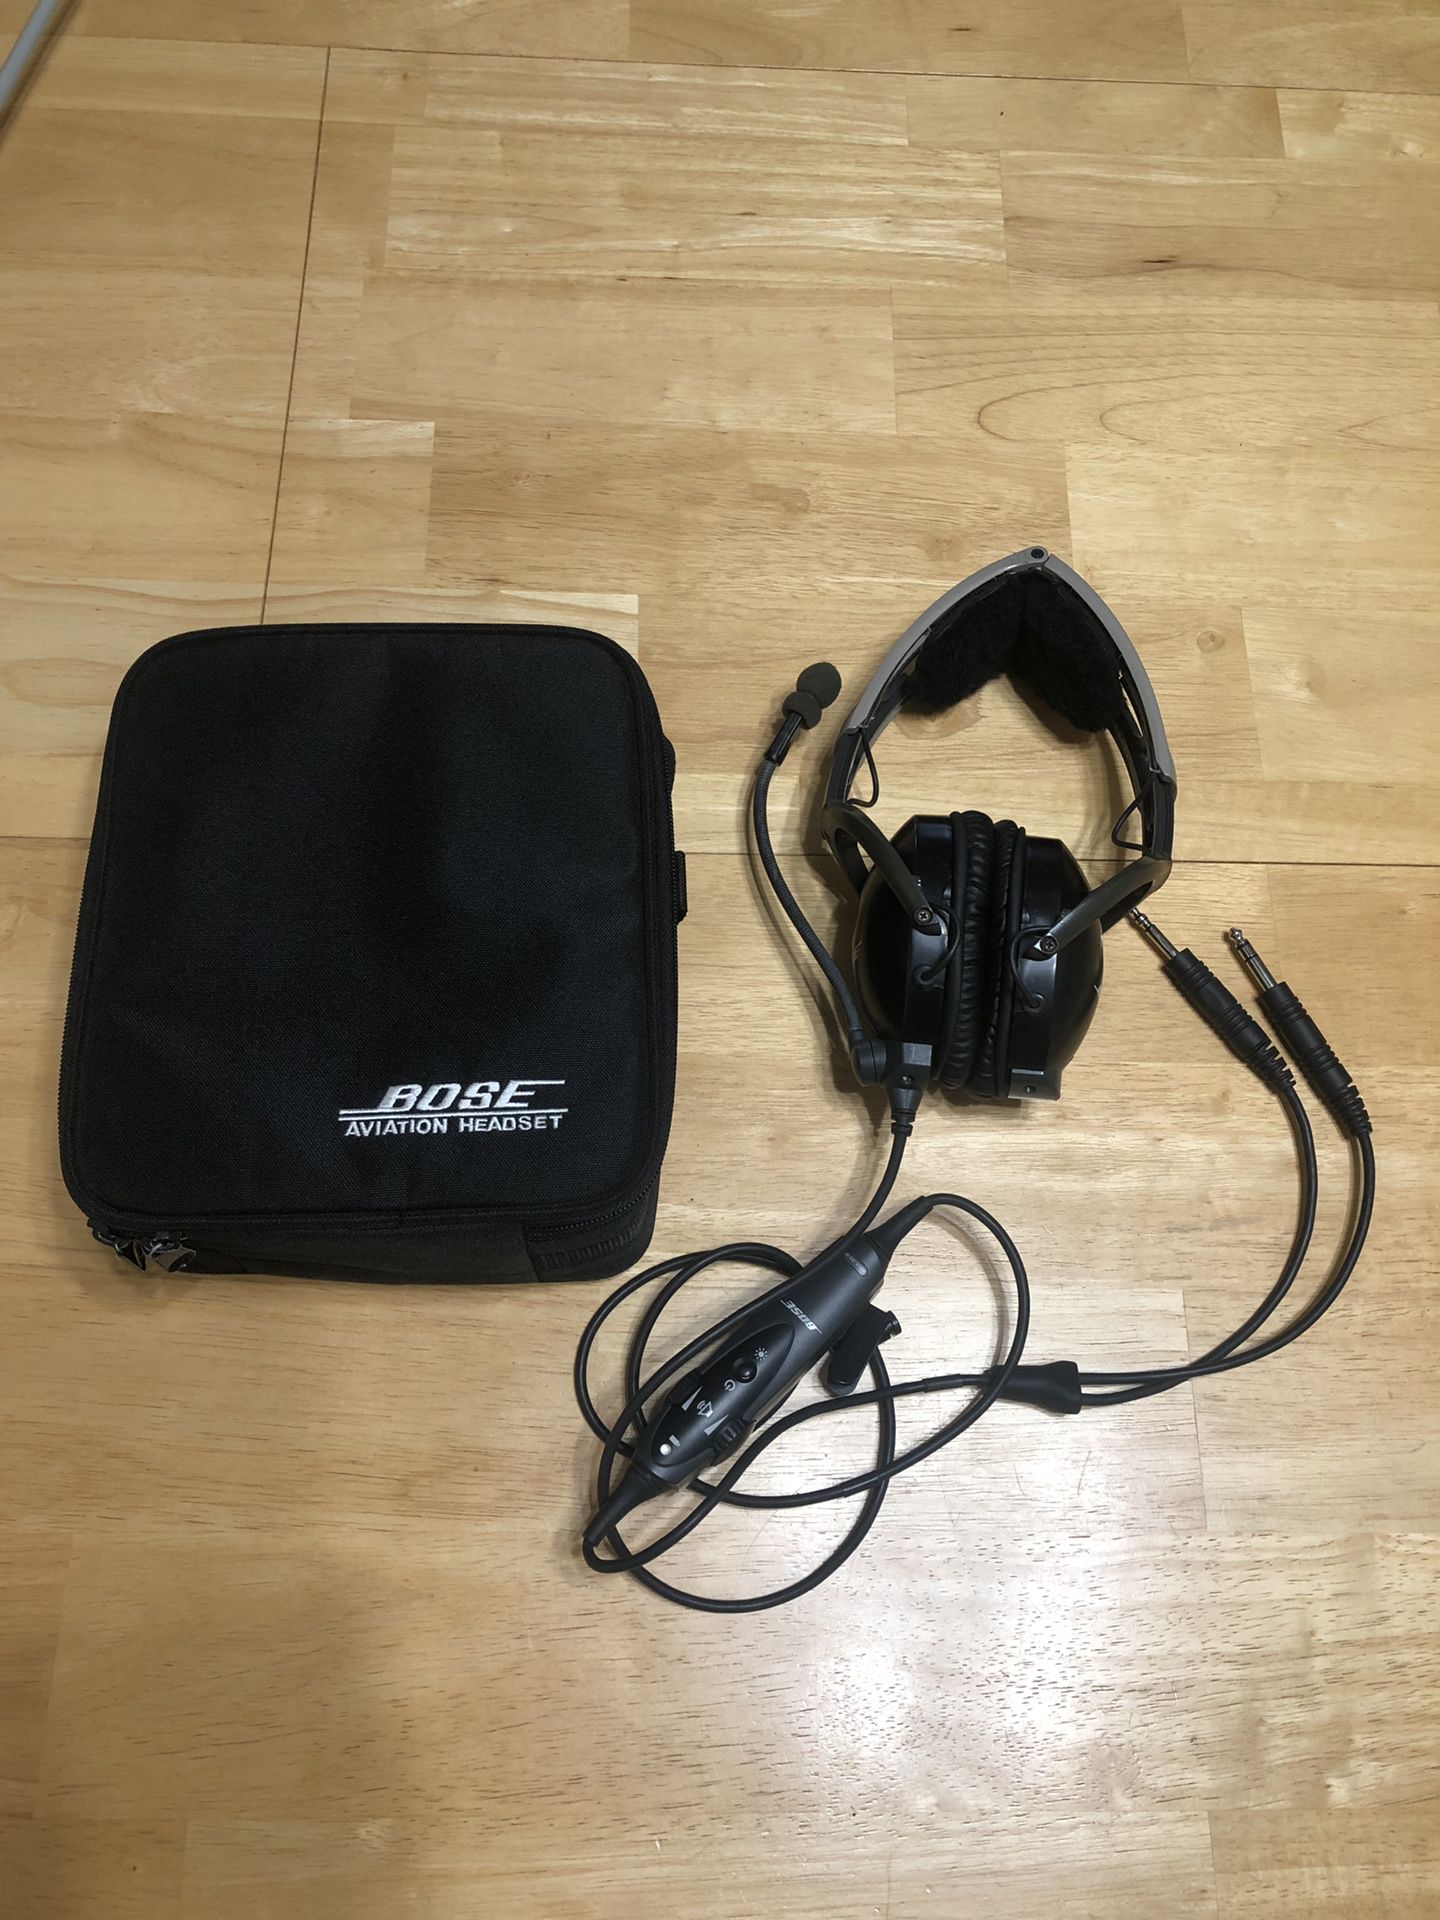 Bose Aviation AHX-32-01 noise cancelling headset